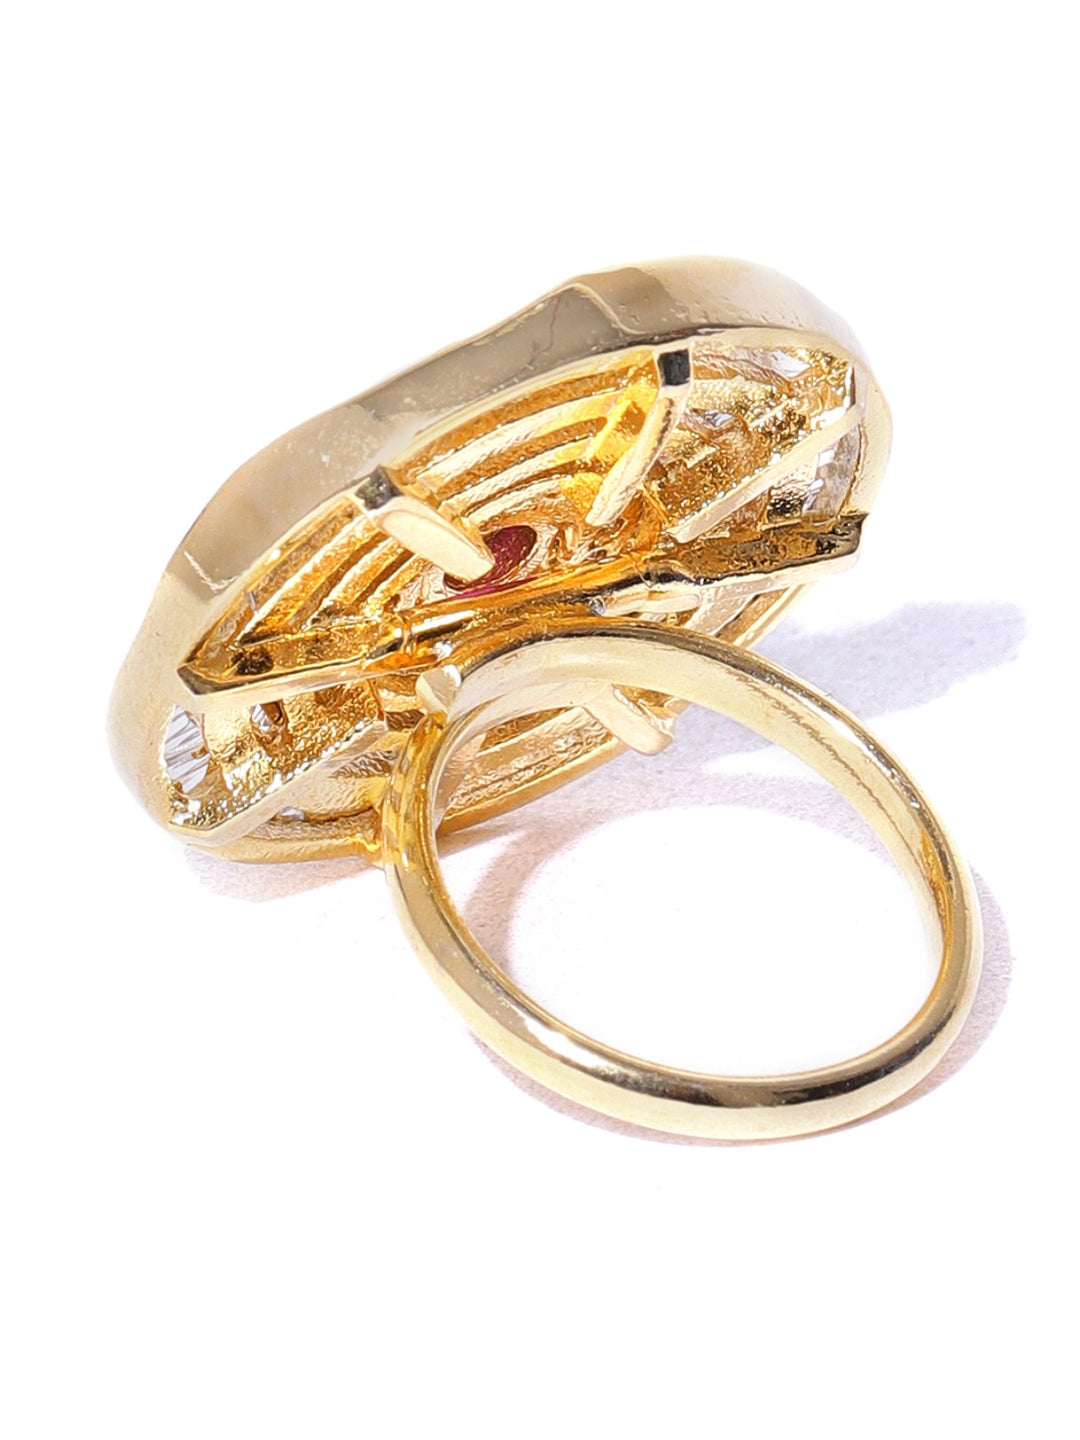 Designer Gold Plated American Diamond Ring With Single Red Stone For Women And Girls